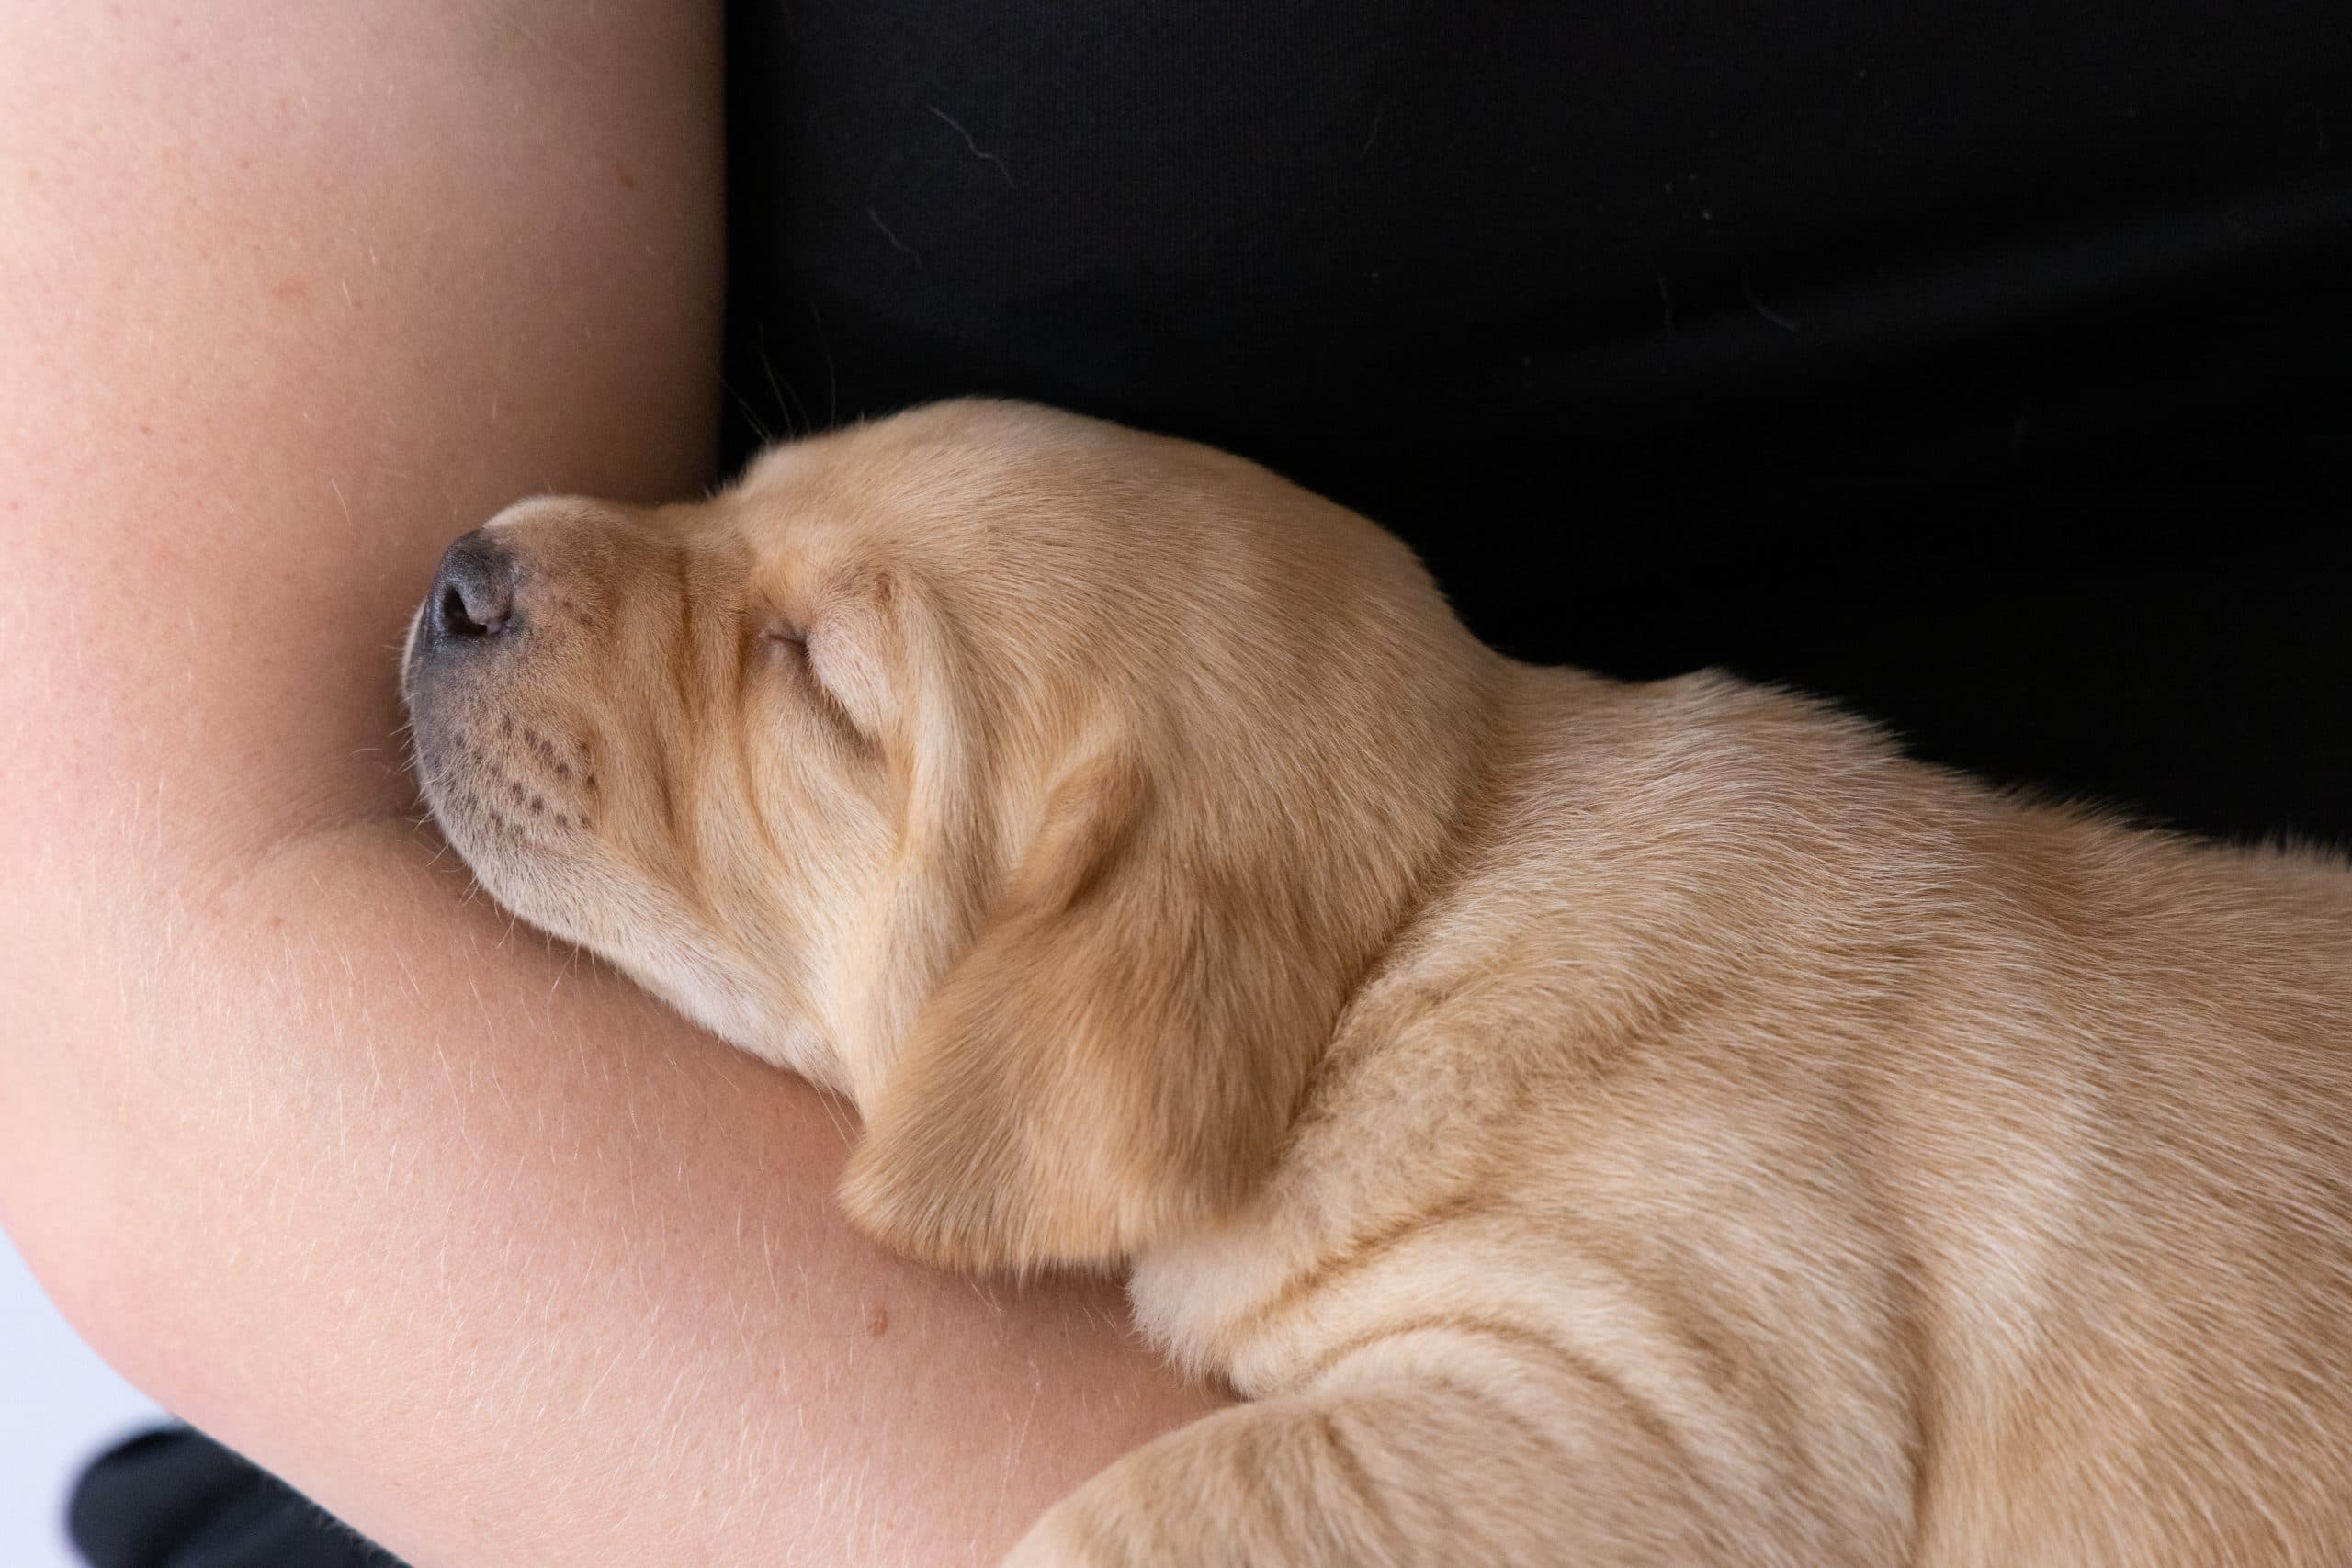 A very young guide dog puppy sits snuggled in someone's arms sleepily